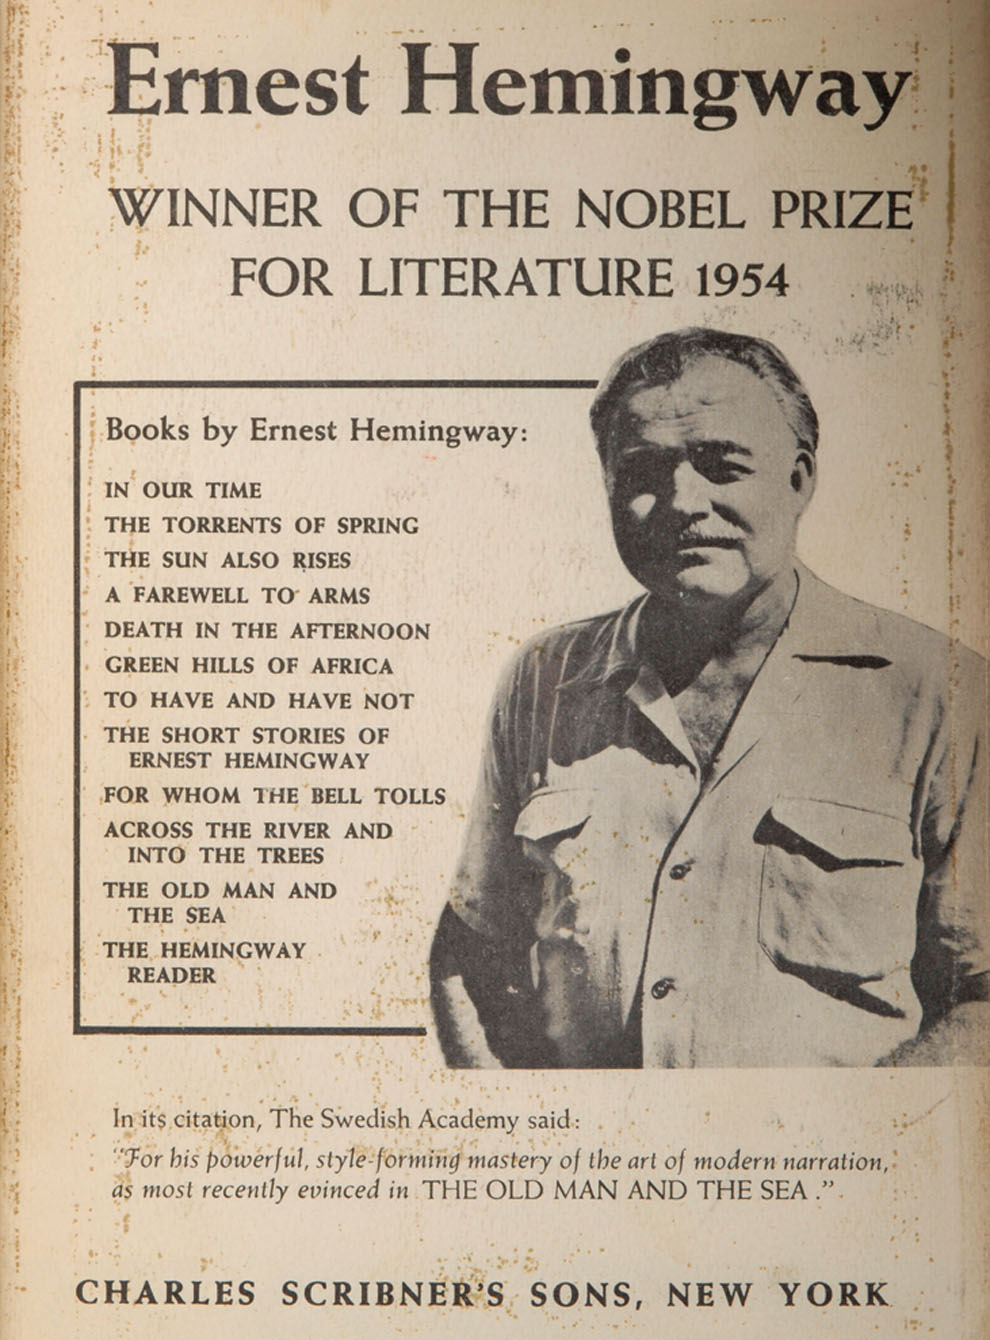 An analysis of the personal experiences in a farewell to arms by ernest hemingway